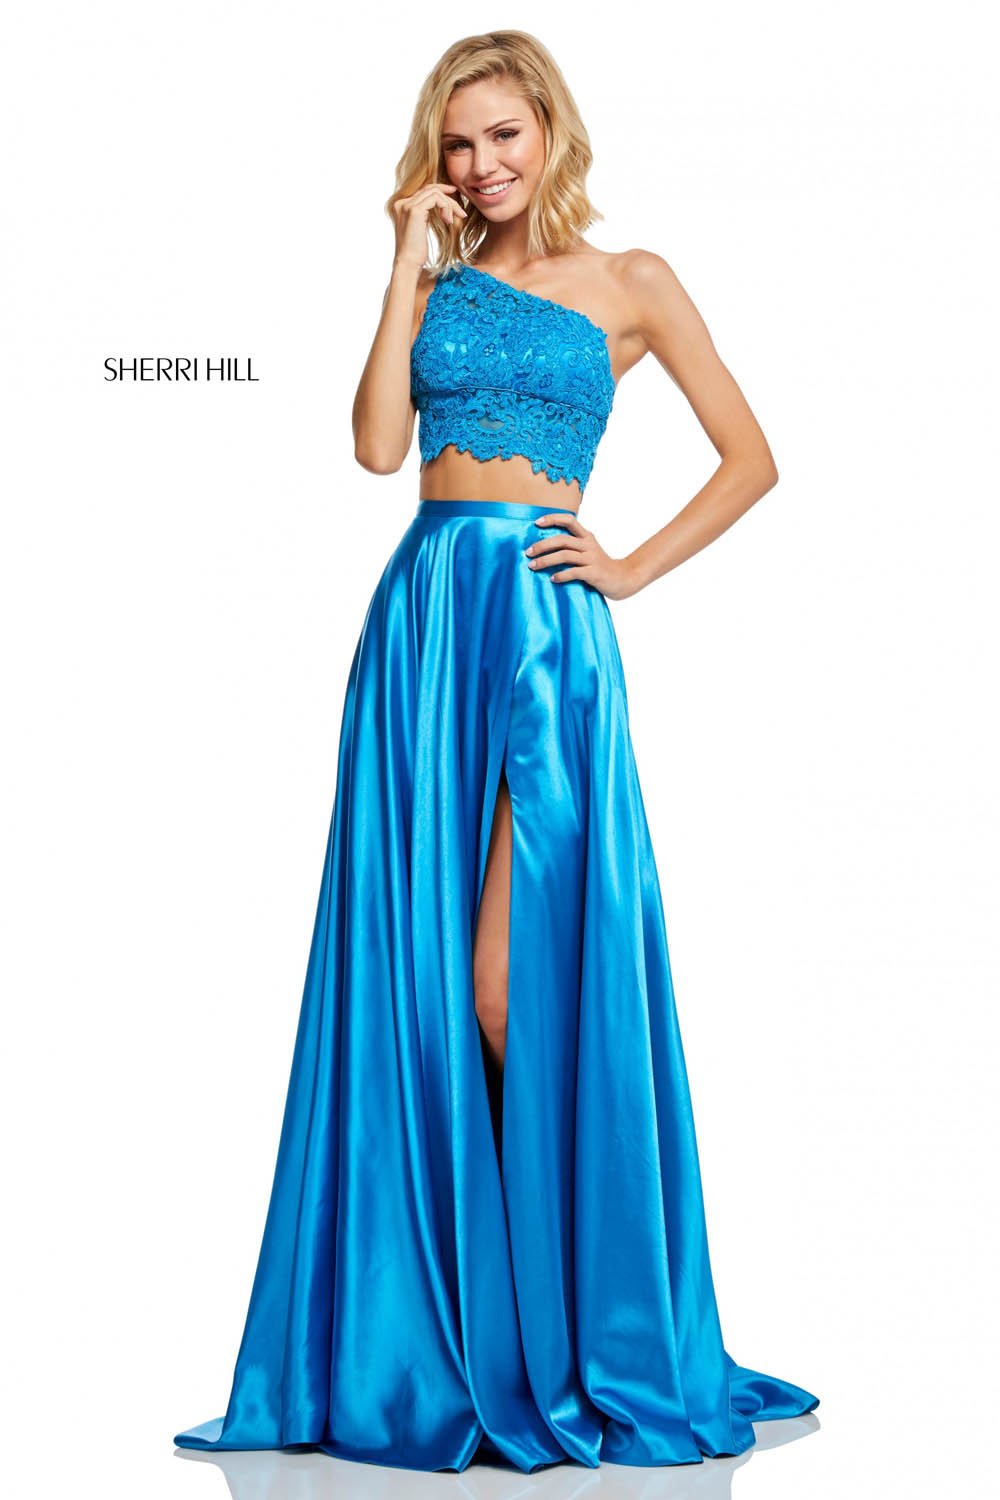 Sherri Hill 52730 dress images in these colors: Red, Rose, Lilac, Teal, Yellow, Black Red, Peacock, Ivory Mocha, Wine.